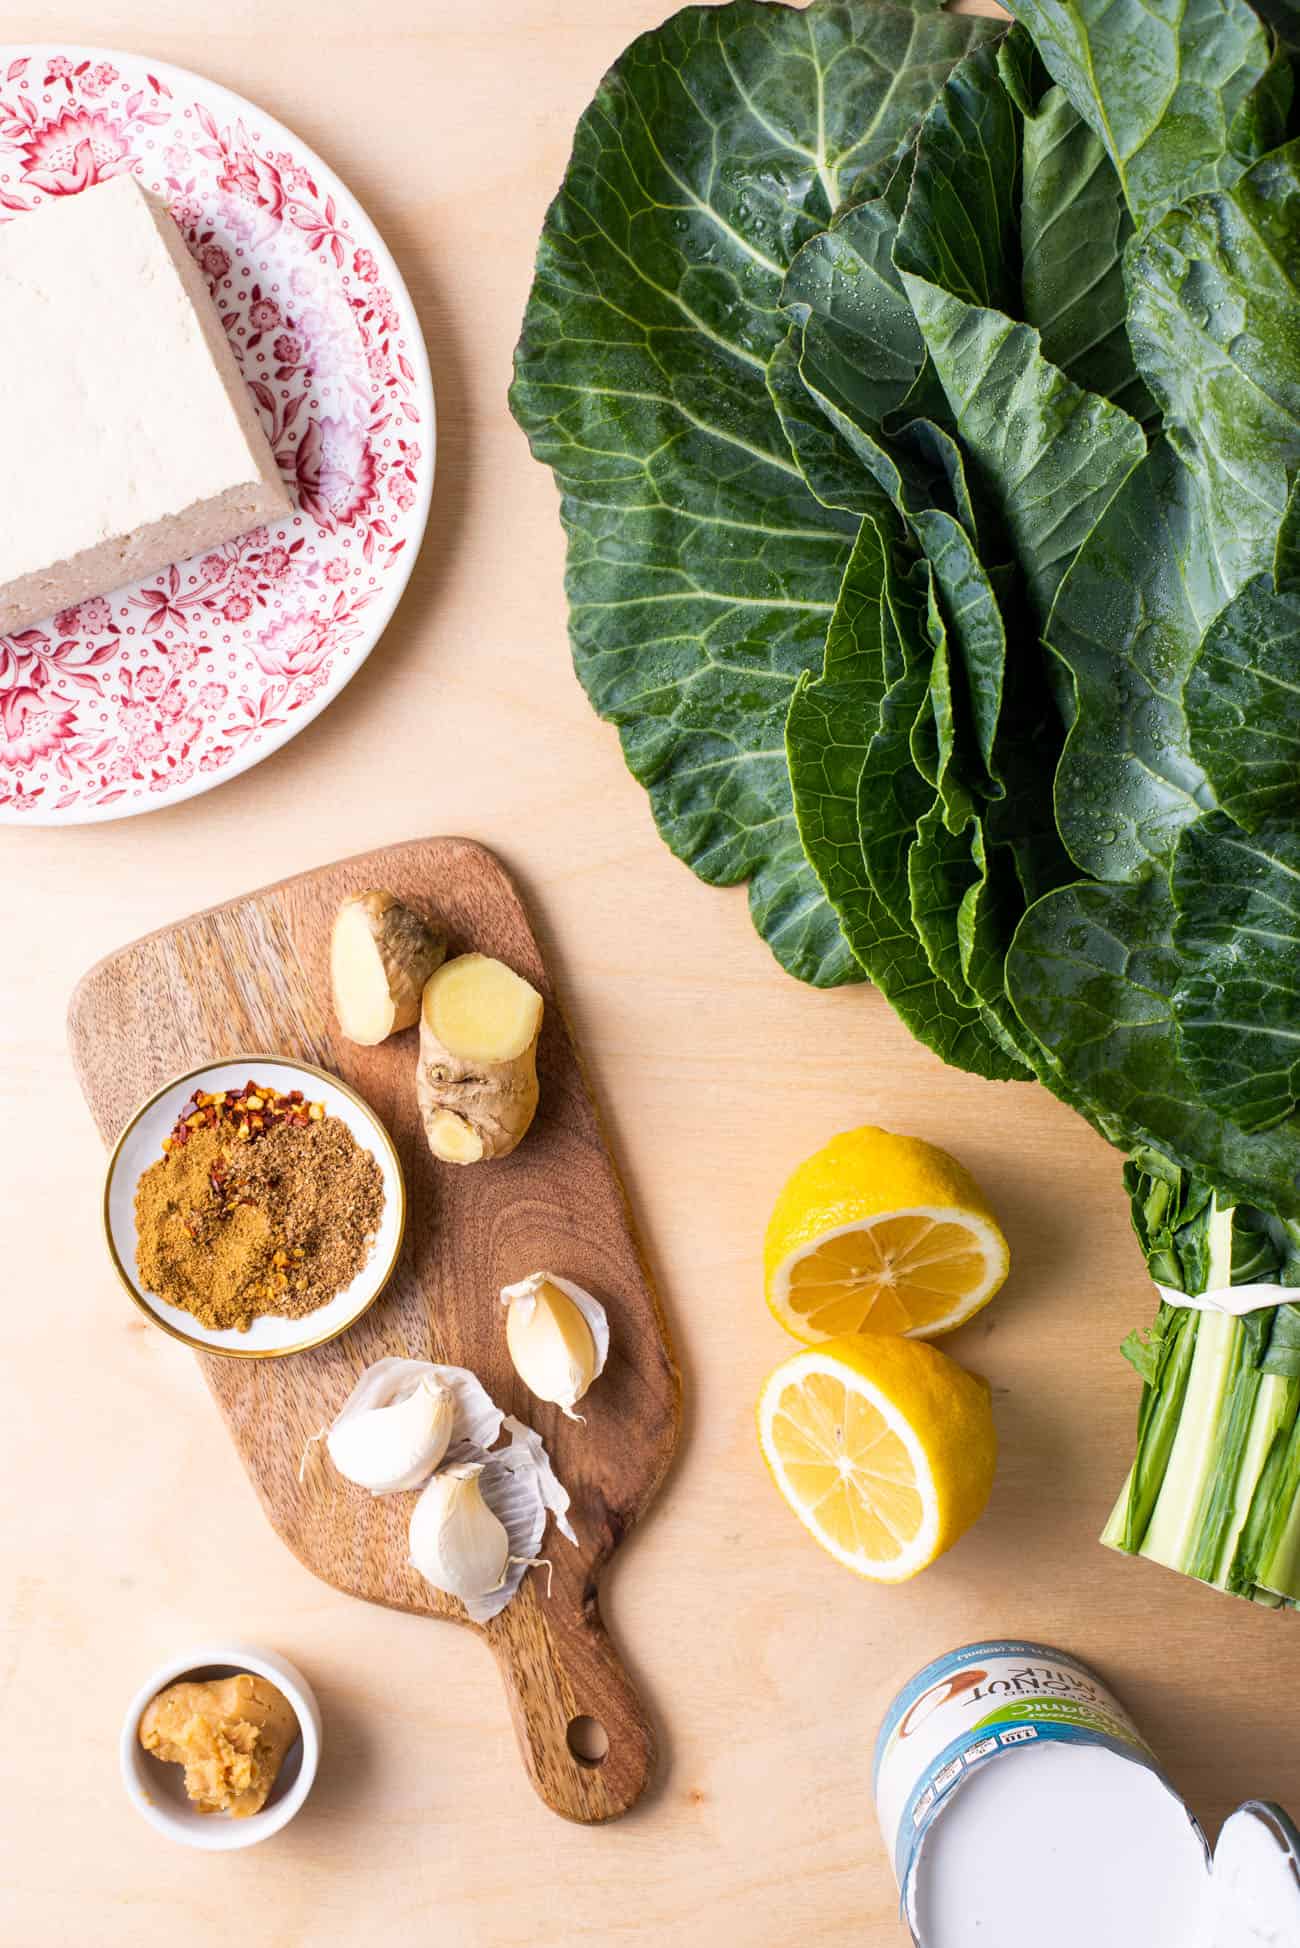 Tofu, collard greens, spices, miso, and lemon - all gathered on a wooden table